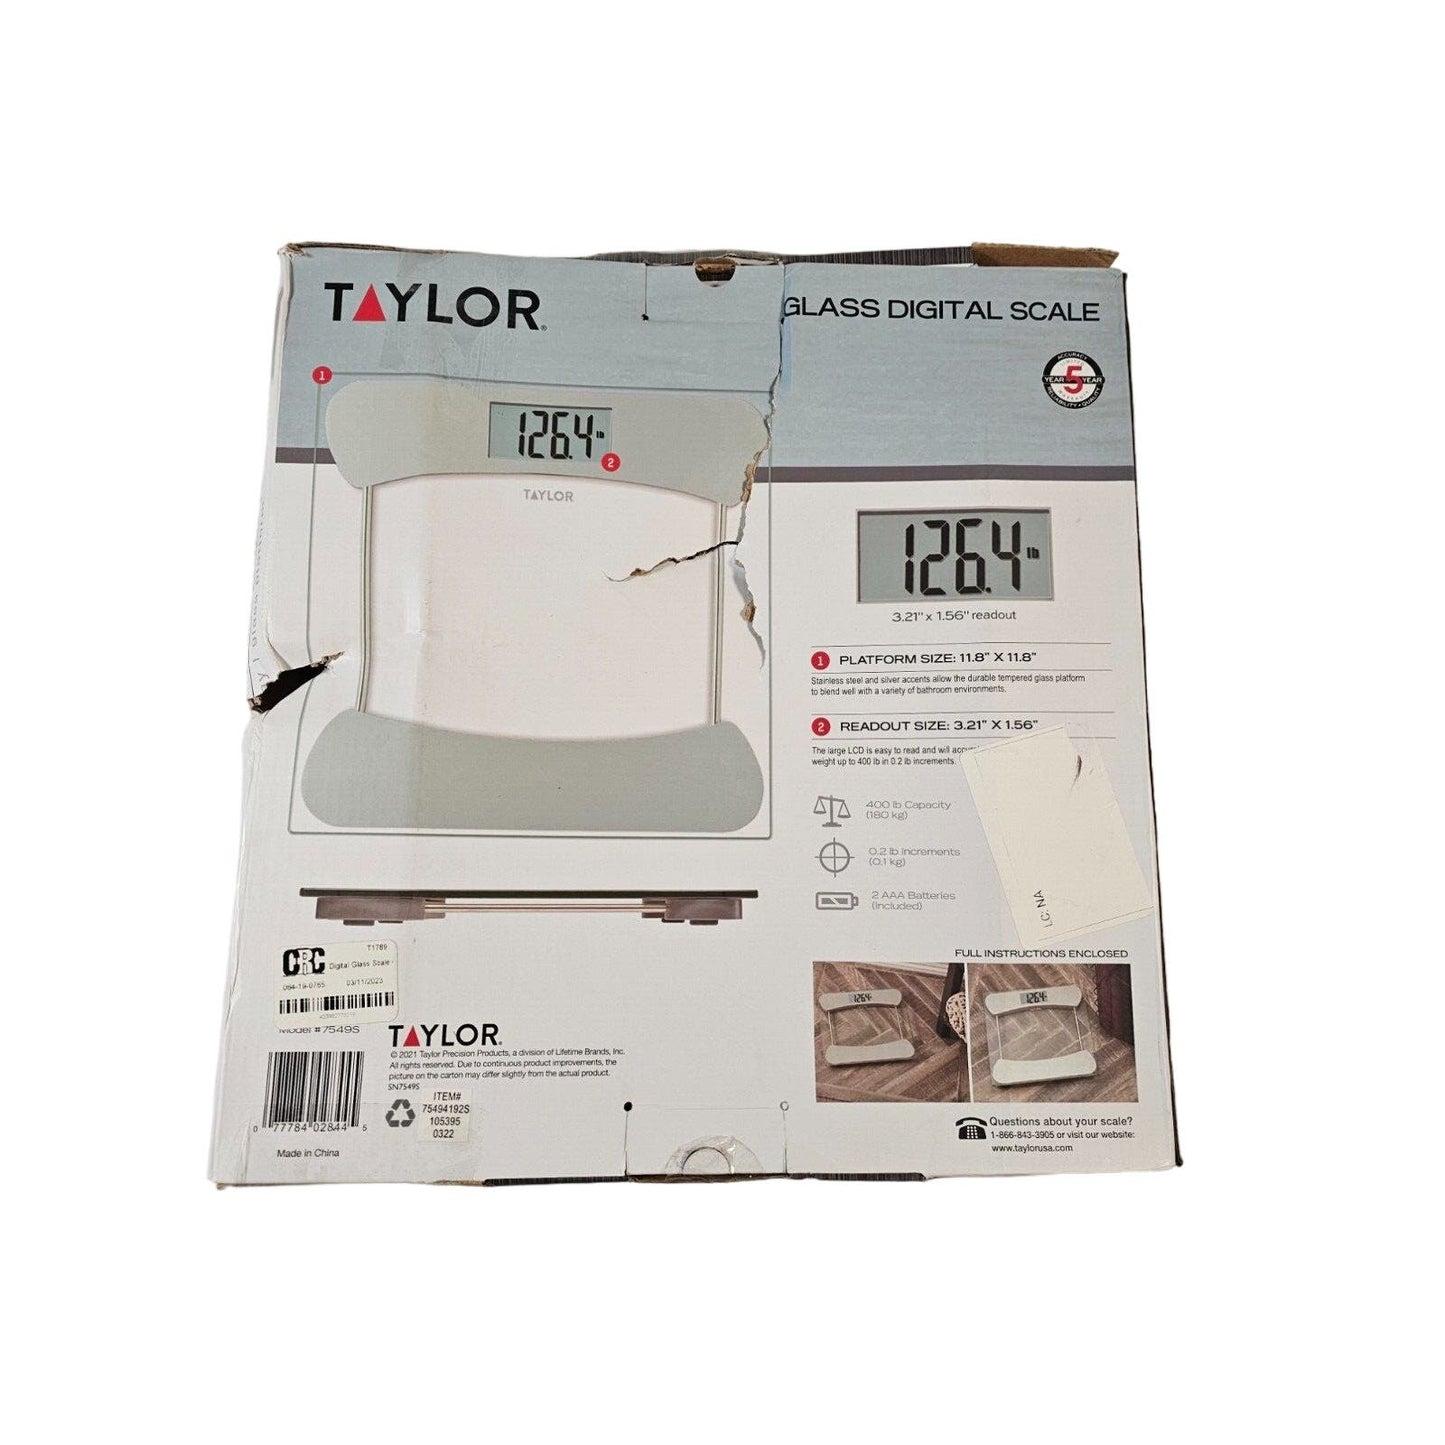 Taylor Digital Clear Glass Stainless Steel Scale with 400 lbs. Capacity